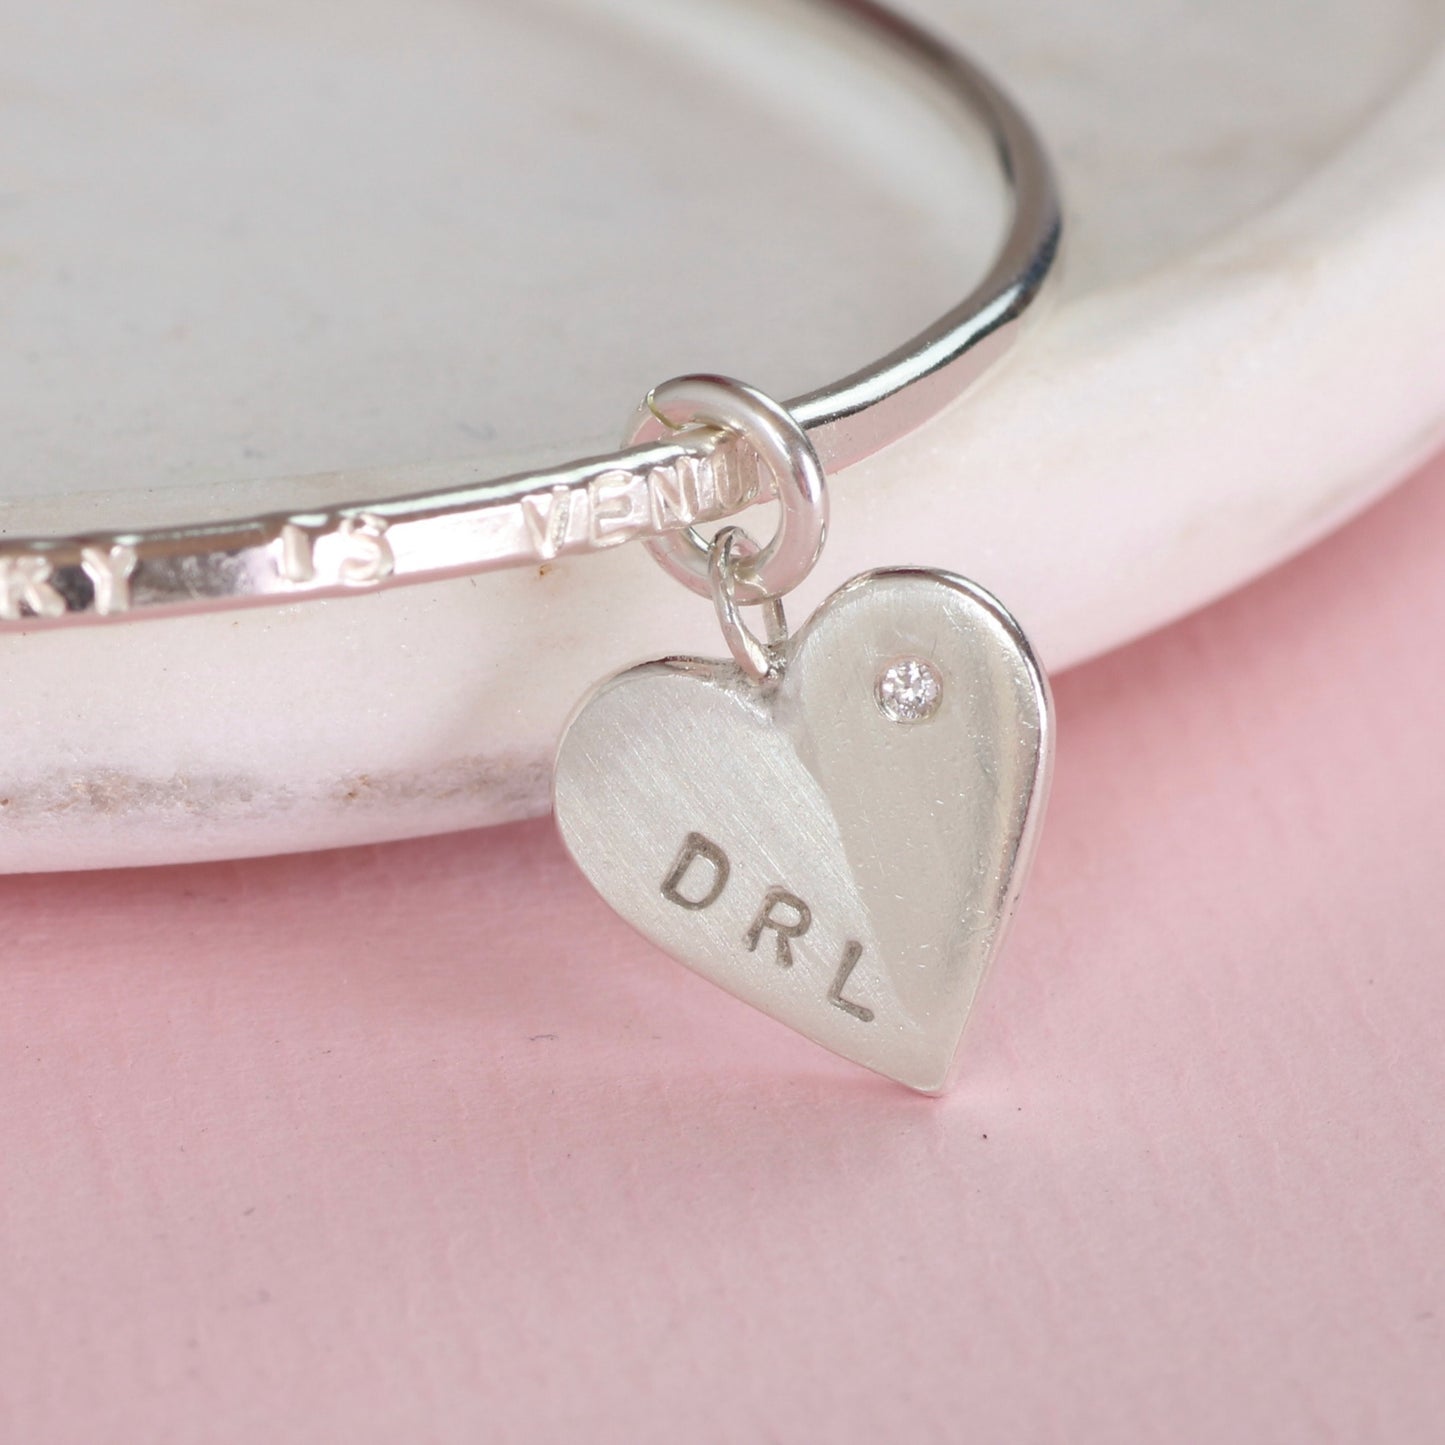 diamond bracelet for bereavement gift, personalized jewelry remembrance